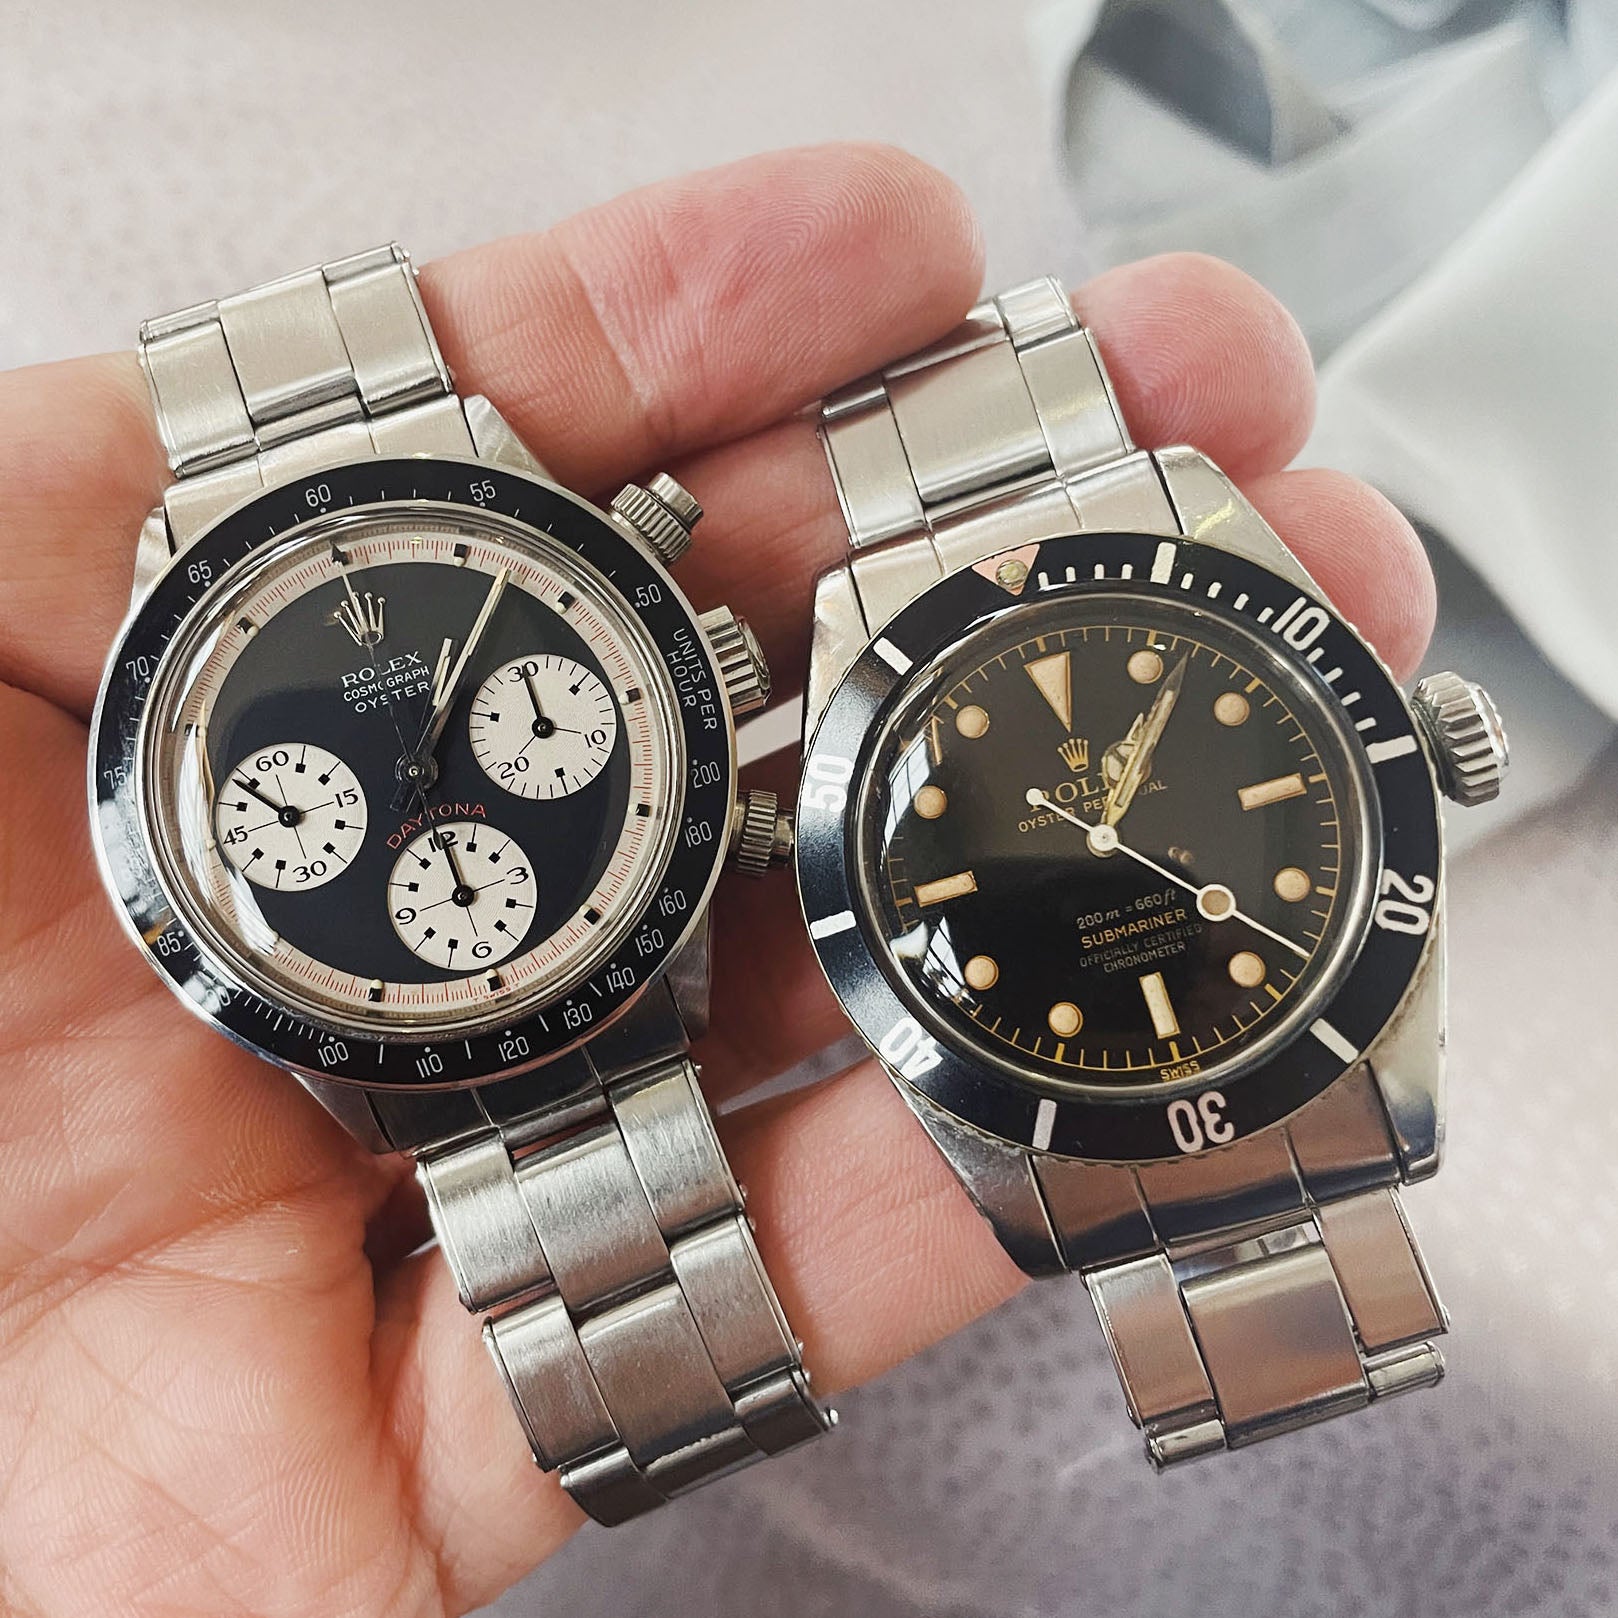 Rolex 6263 RCO Black Dial Newman Daytona and Rolex 6538 4-liner Big Crown at Rolliefest 2023